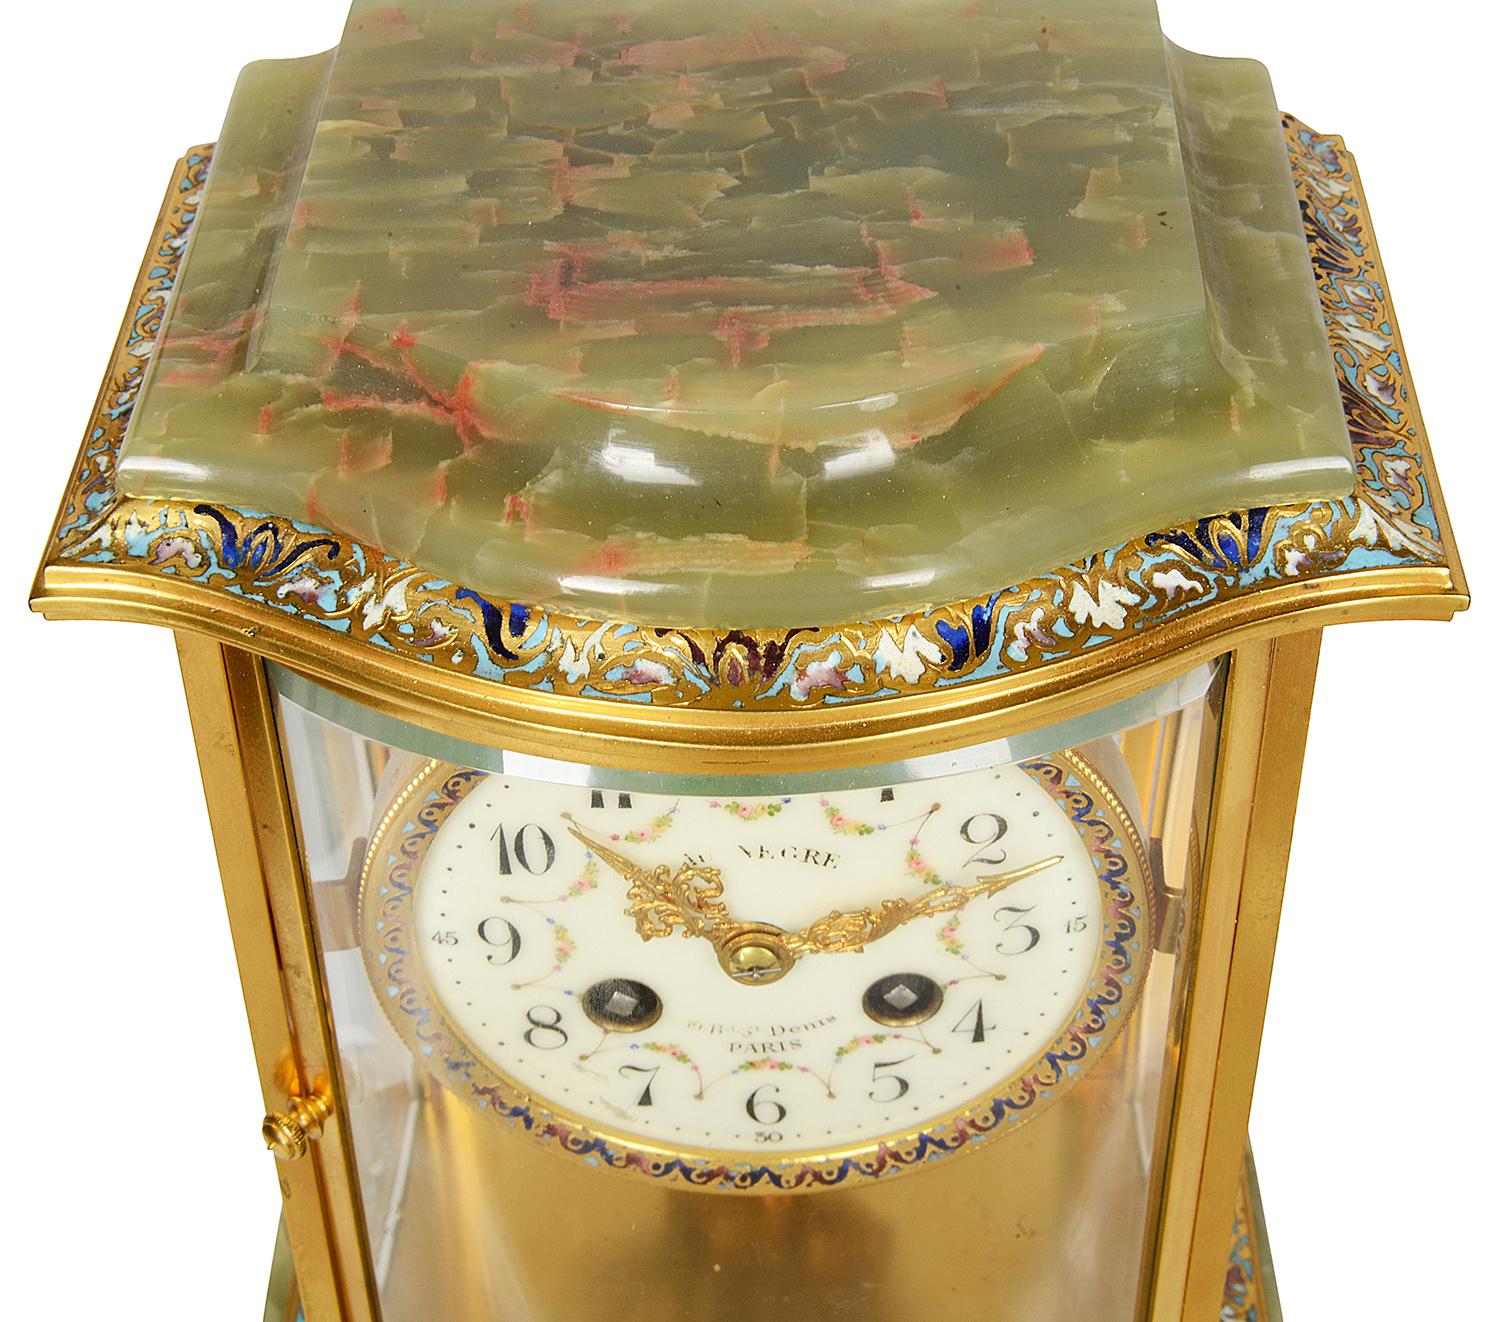 A very good quality late 19th century French gilded ormolu, champleve enamel and onyx four glass mantel clock. The white enamel clock face with floral painted swags, the clock strikes on the hour, half hour and has an eight day duration.
Paris maker.